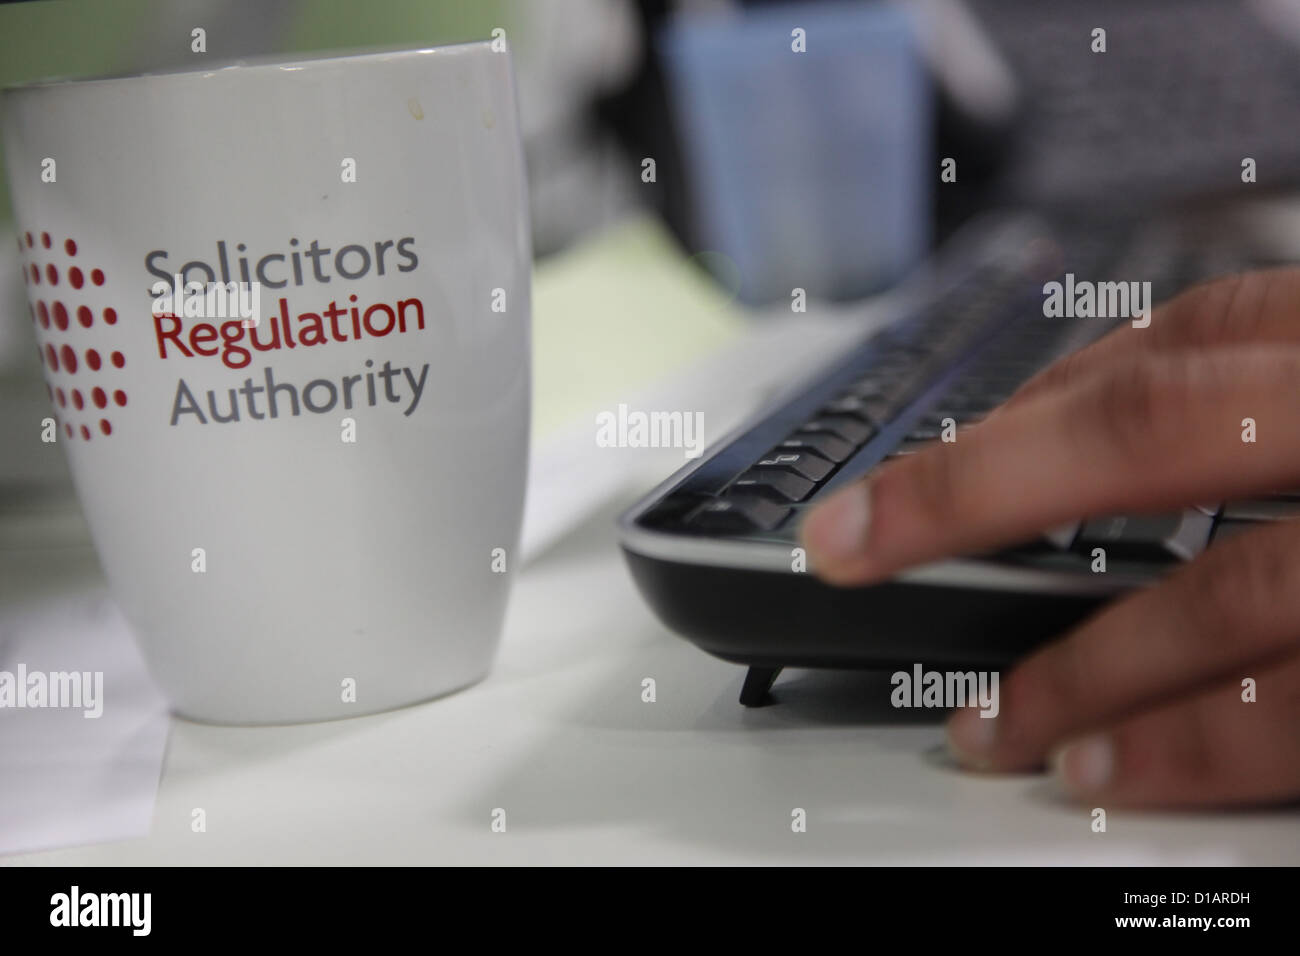 The offices of the Solicitors Regulation Authority in Birmingham. A mug depicts the name of the organization. Stock Photo